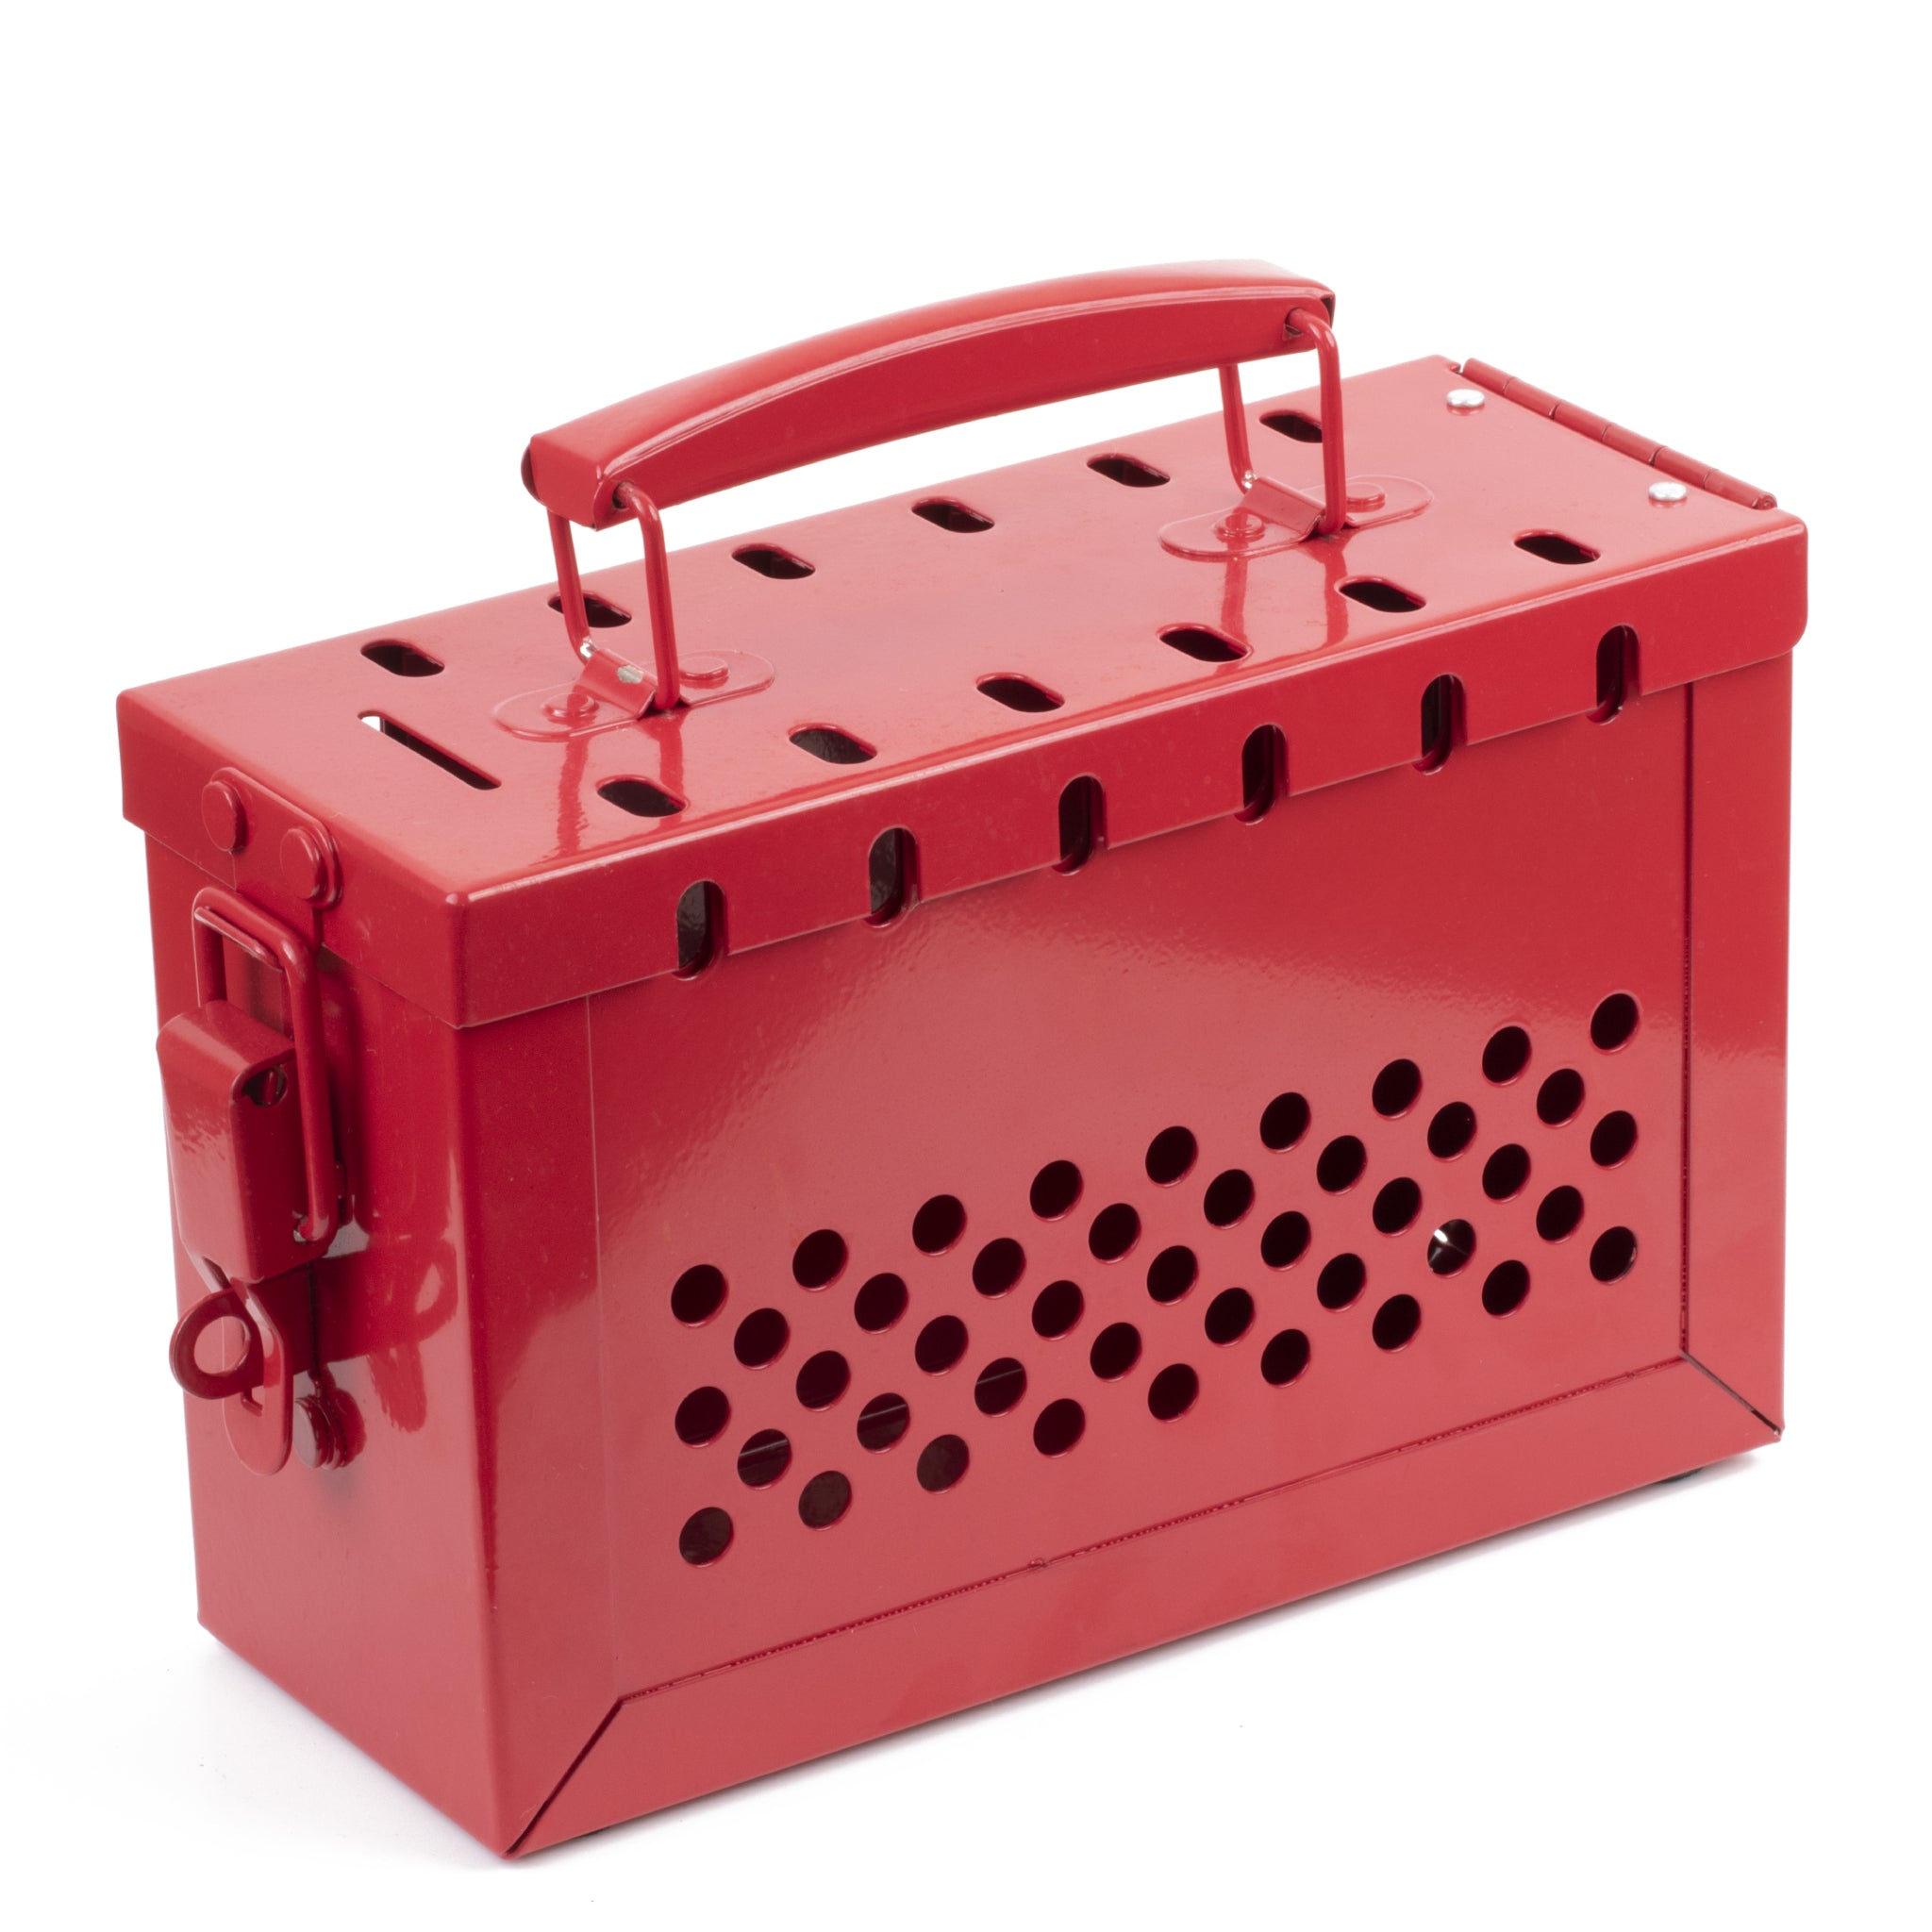 16 Portable Steel Heavy-duty Tool Box 18-Gauge with Metal Latch and Handle  Red